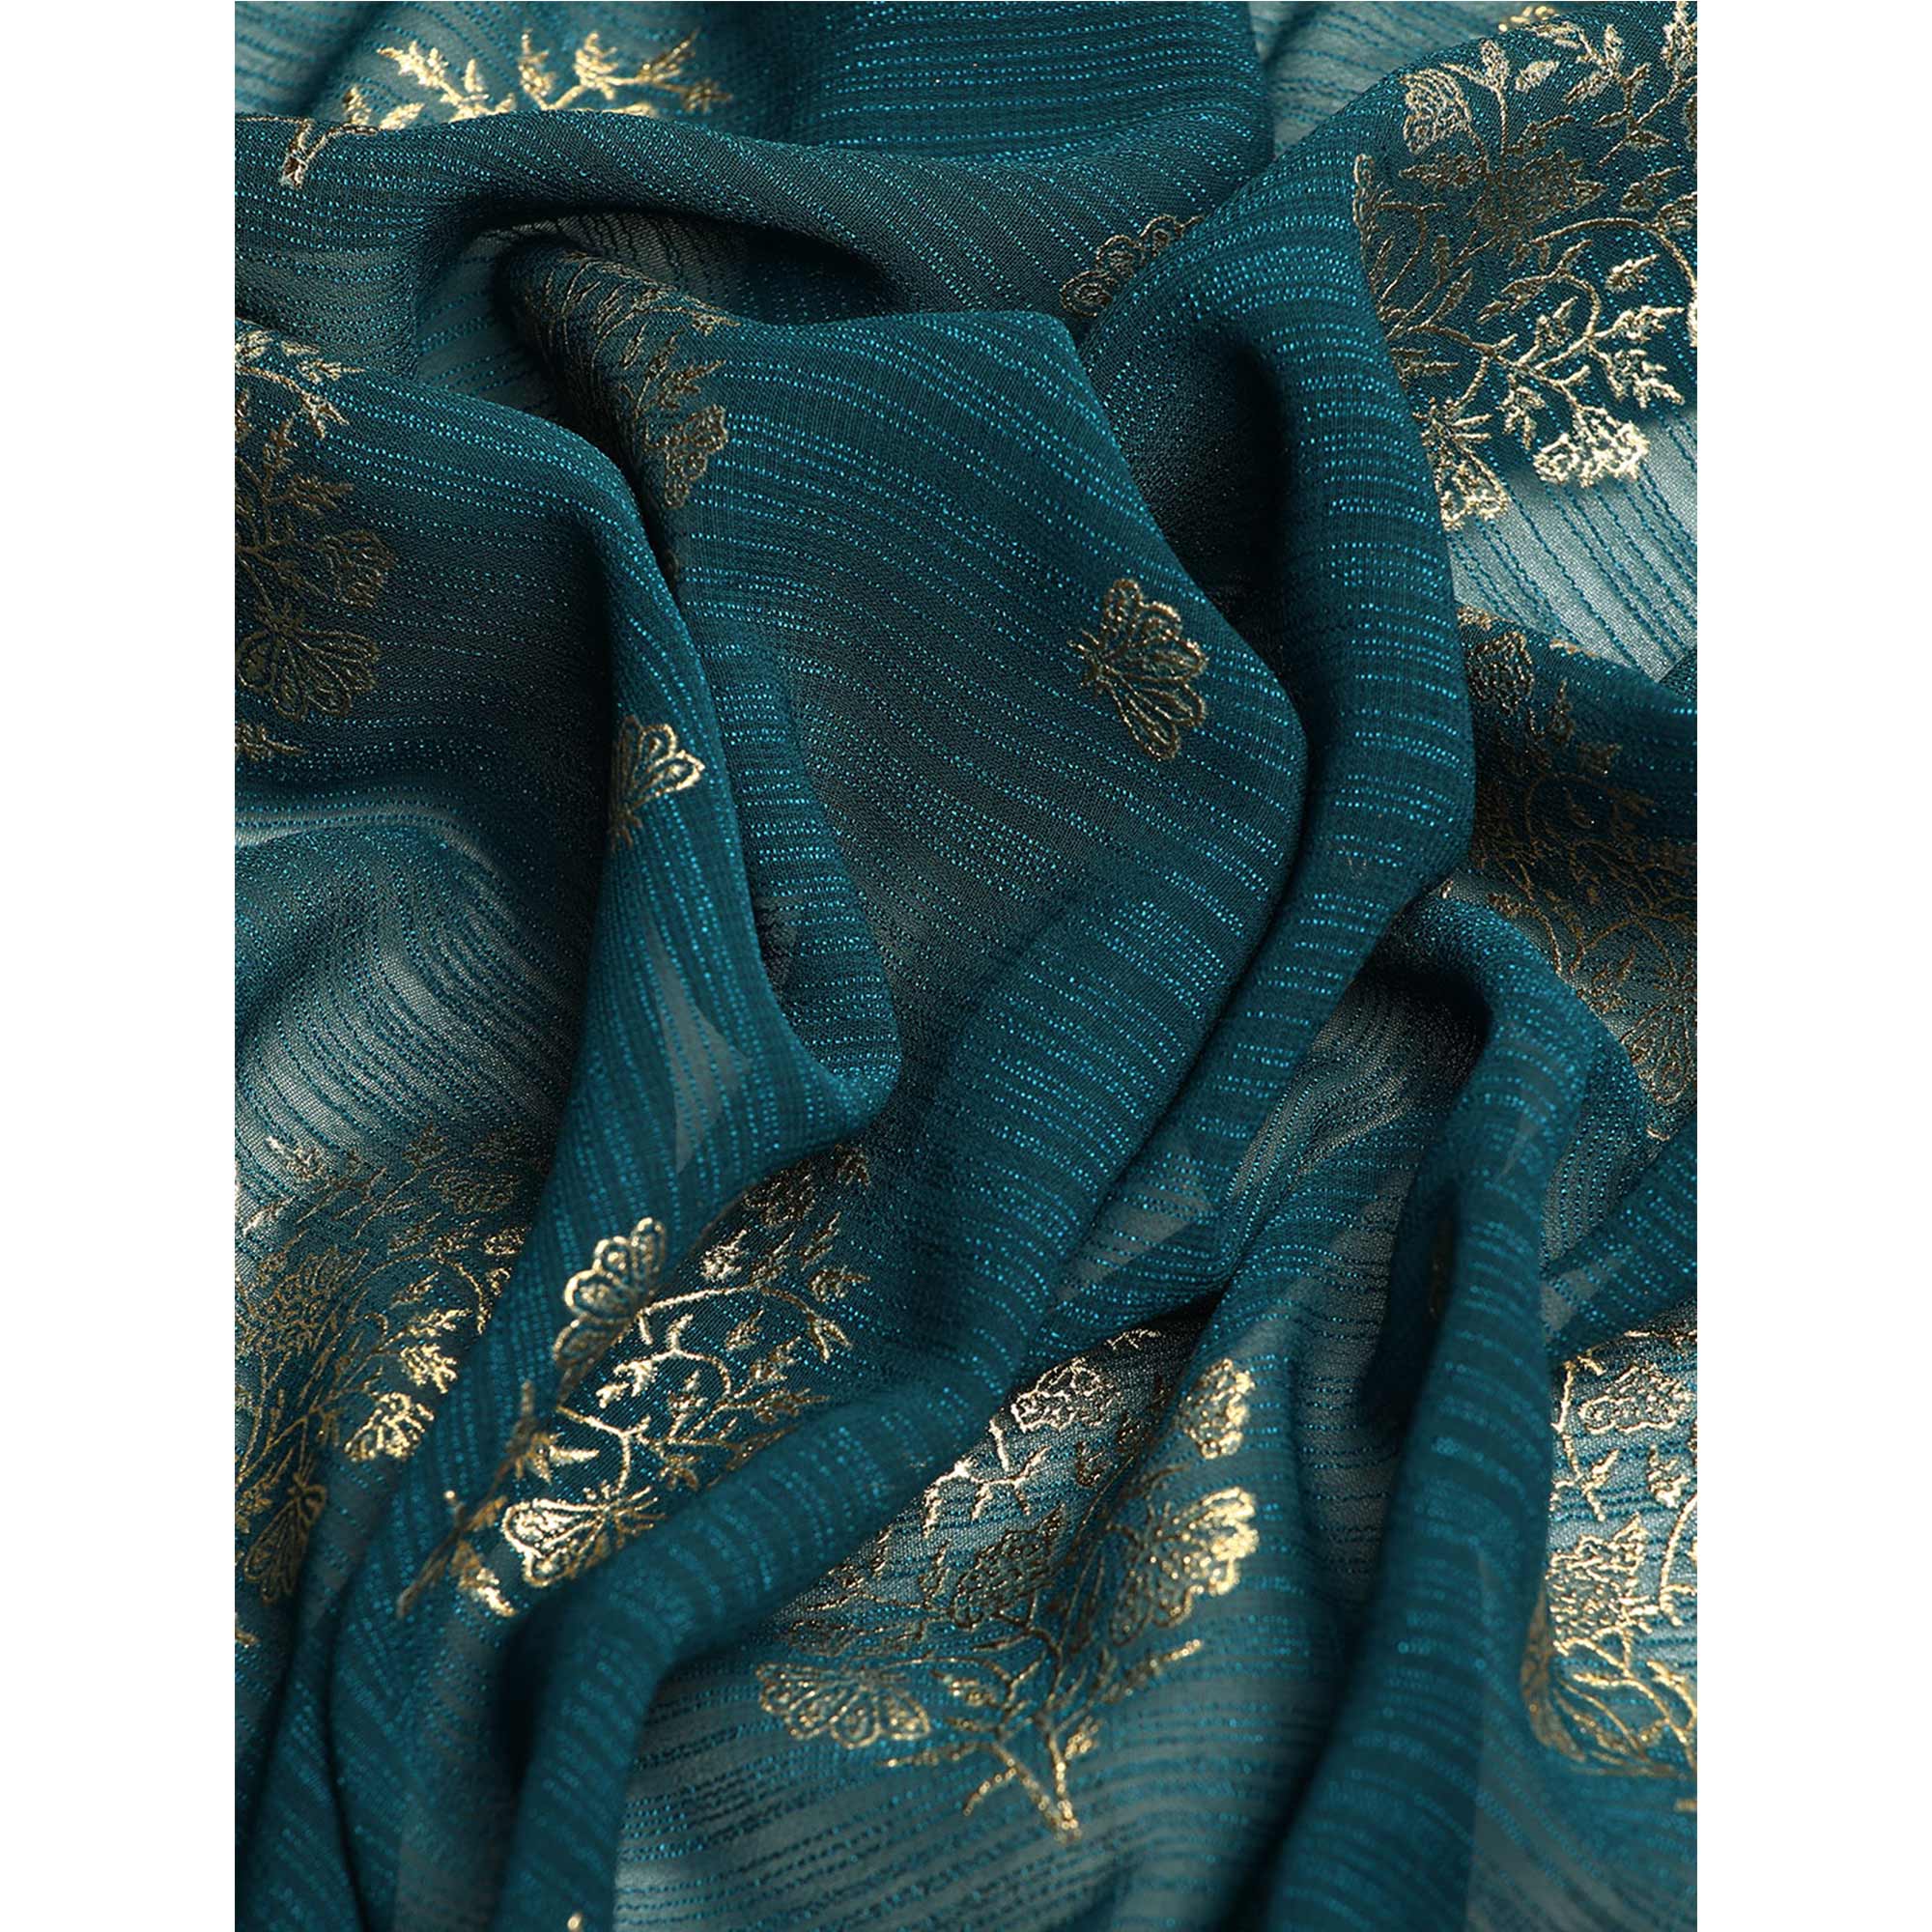 Teal Blue Floral Foil Printed Chiffon Saree With Tassels